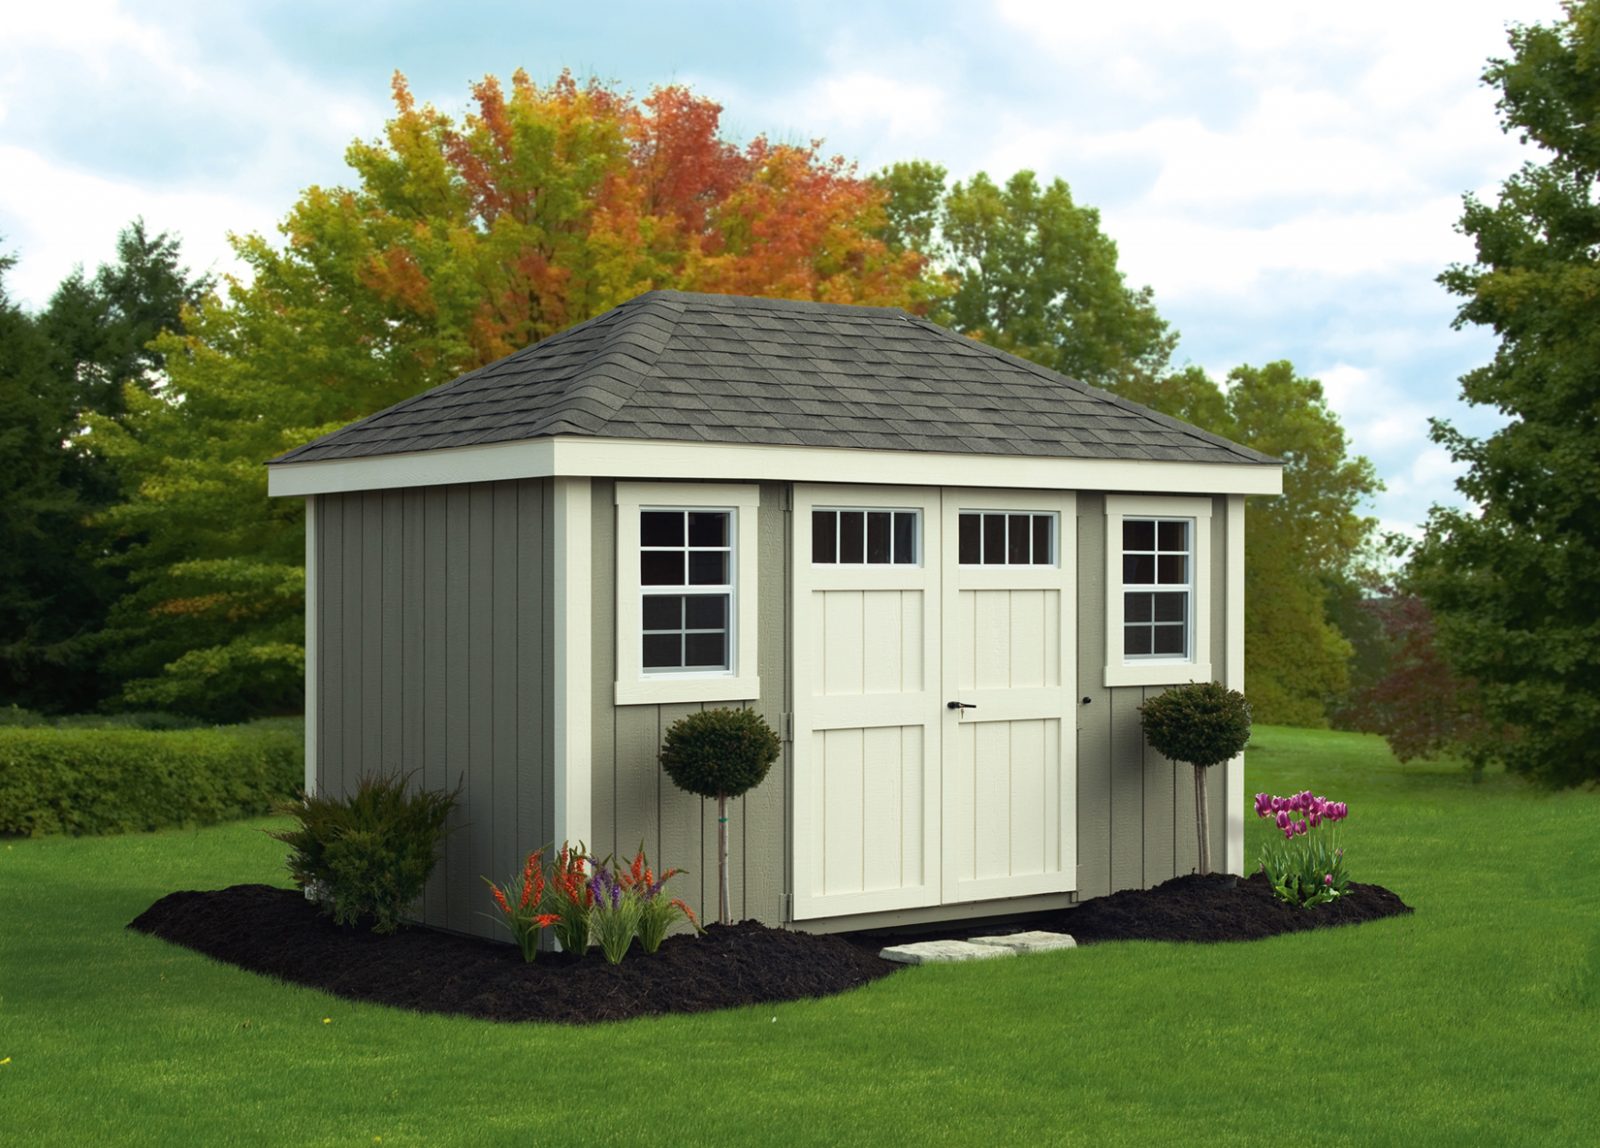 [FOR SALE!] Outdoor Shed in Minneapolis, MN and Hayward, Wisconsin